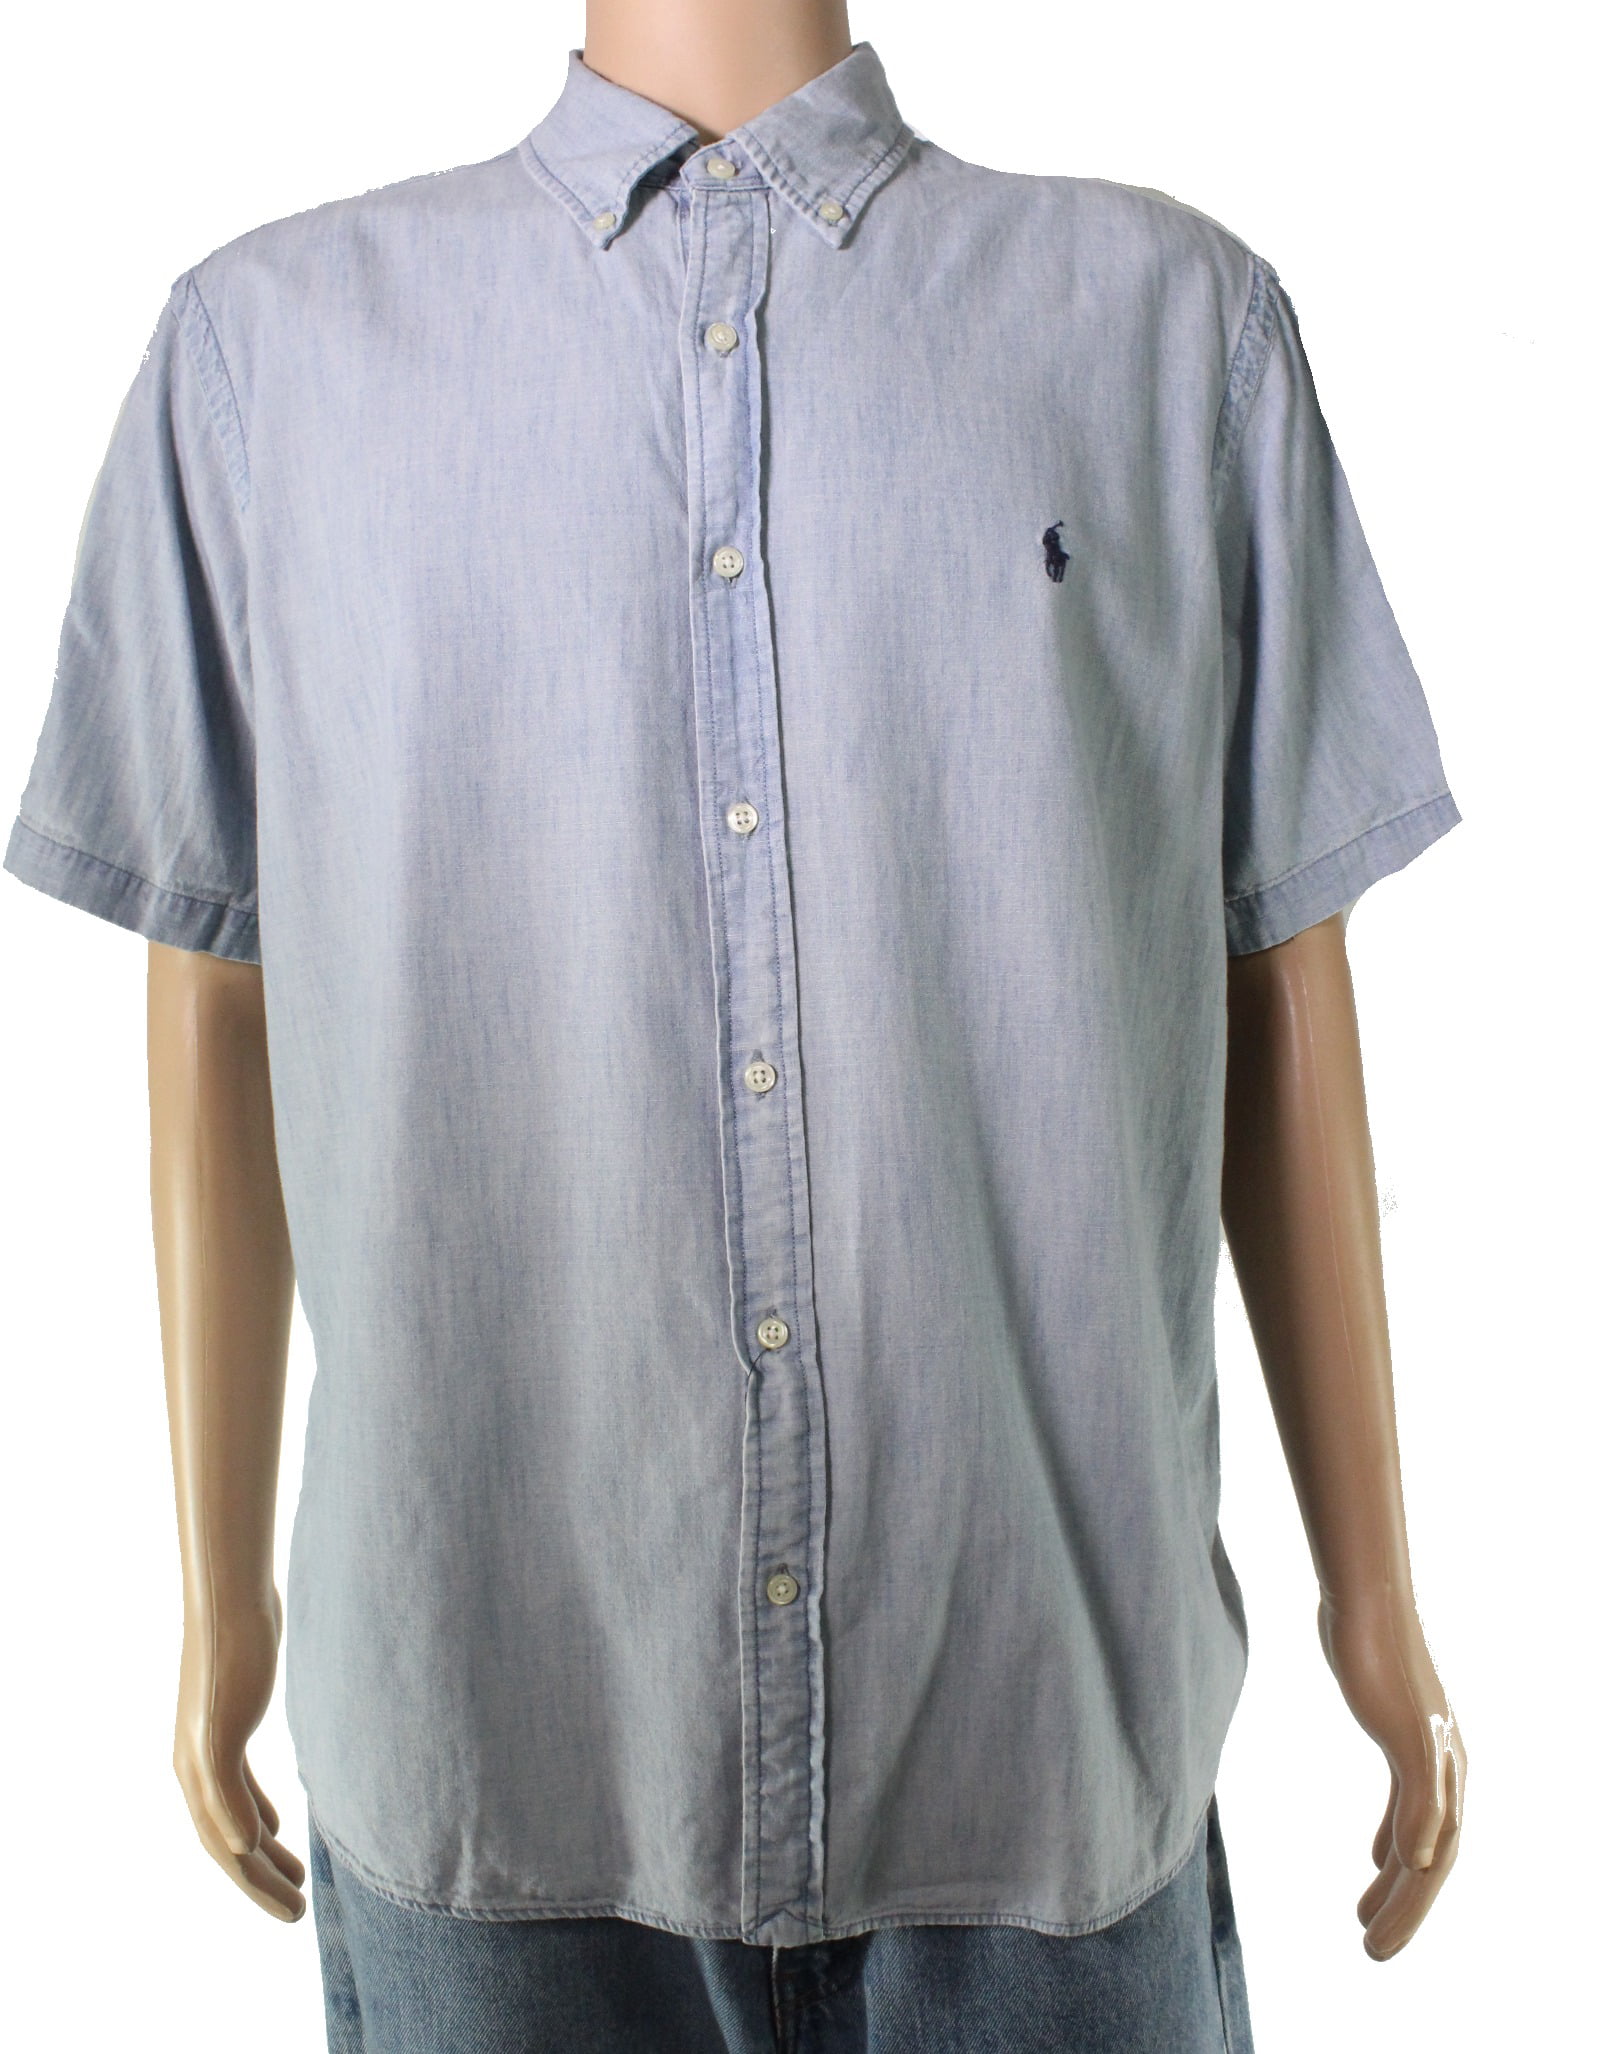 Polo Ralph Lauren Mens Shirt Classic Untucked Fit Chambray Blue XL ...